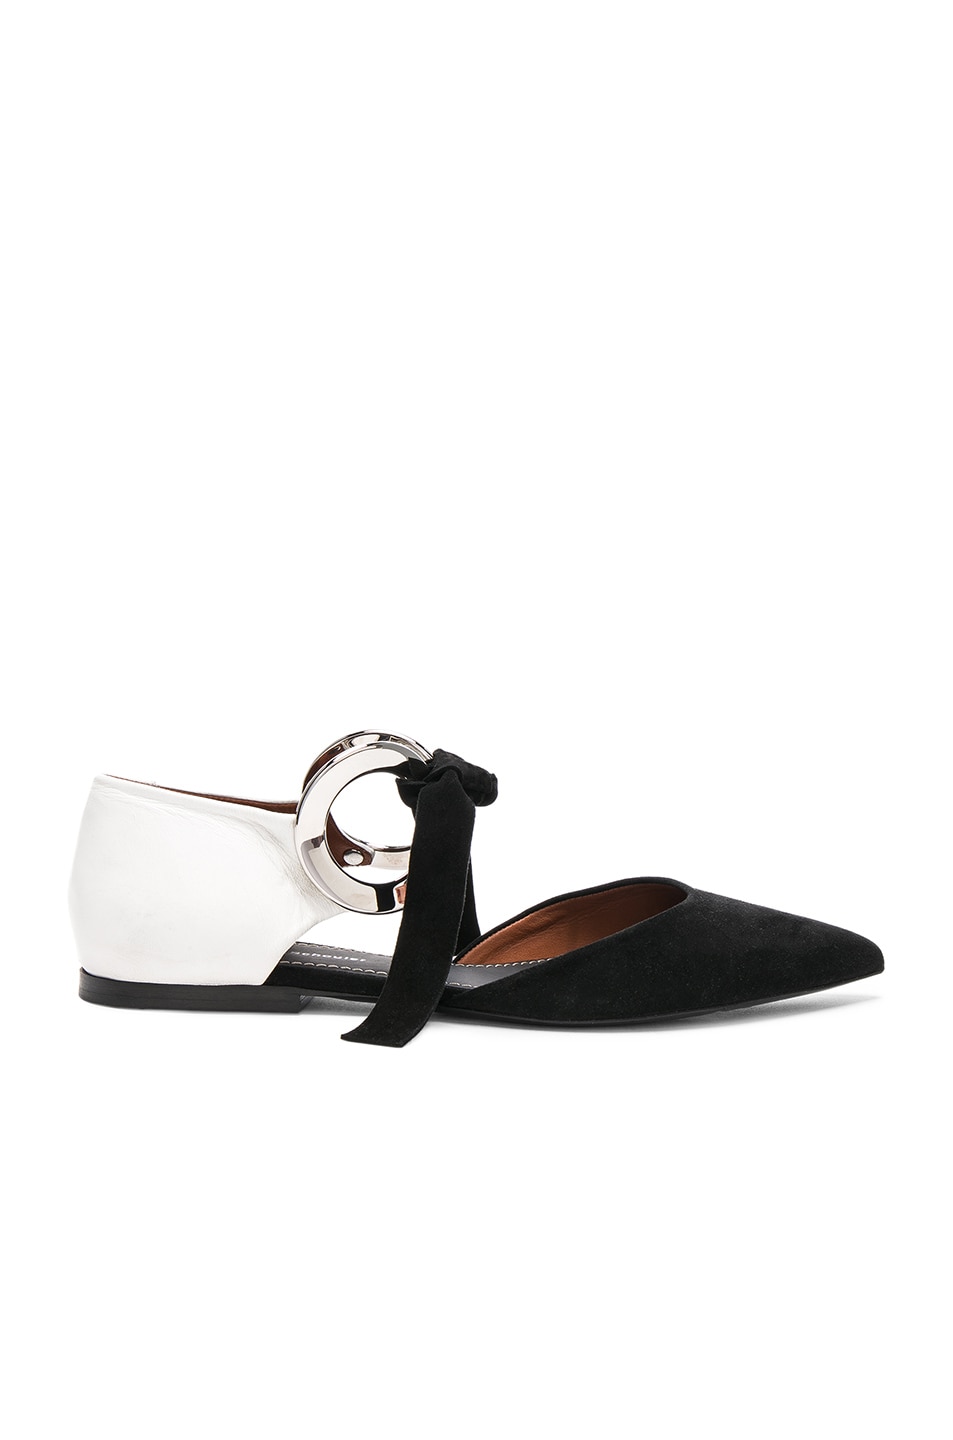 Image 1 of Proenza Schouler Suede Ankle Tie Flats in Black & White